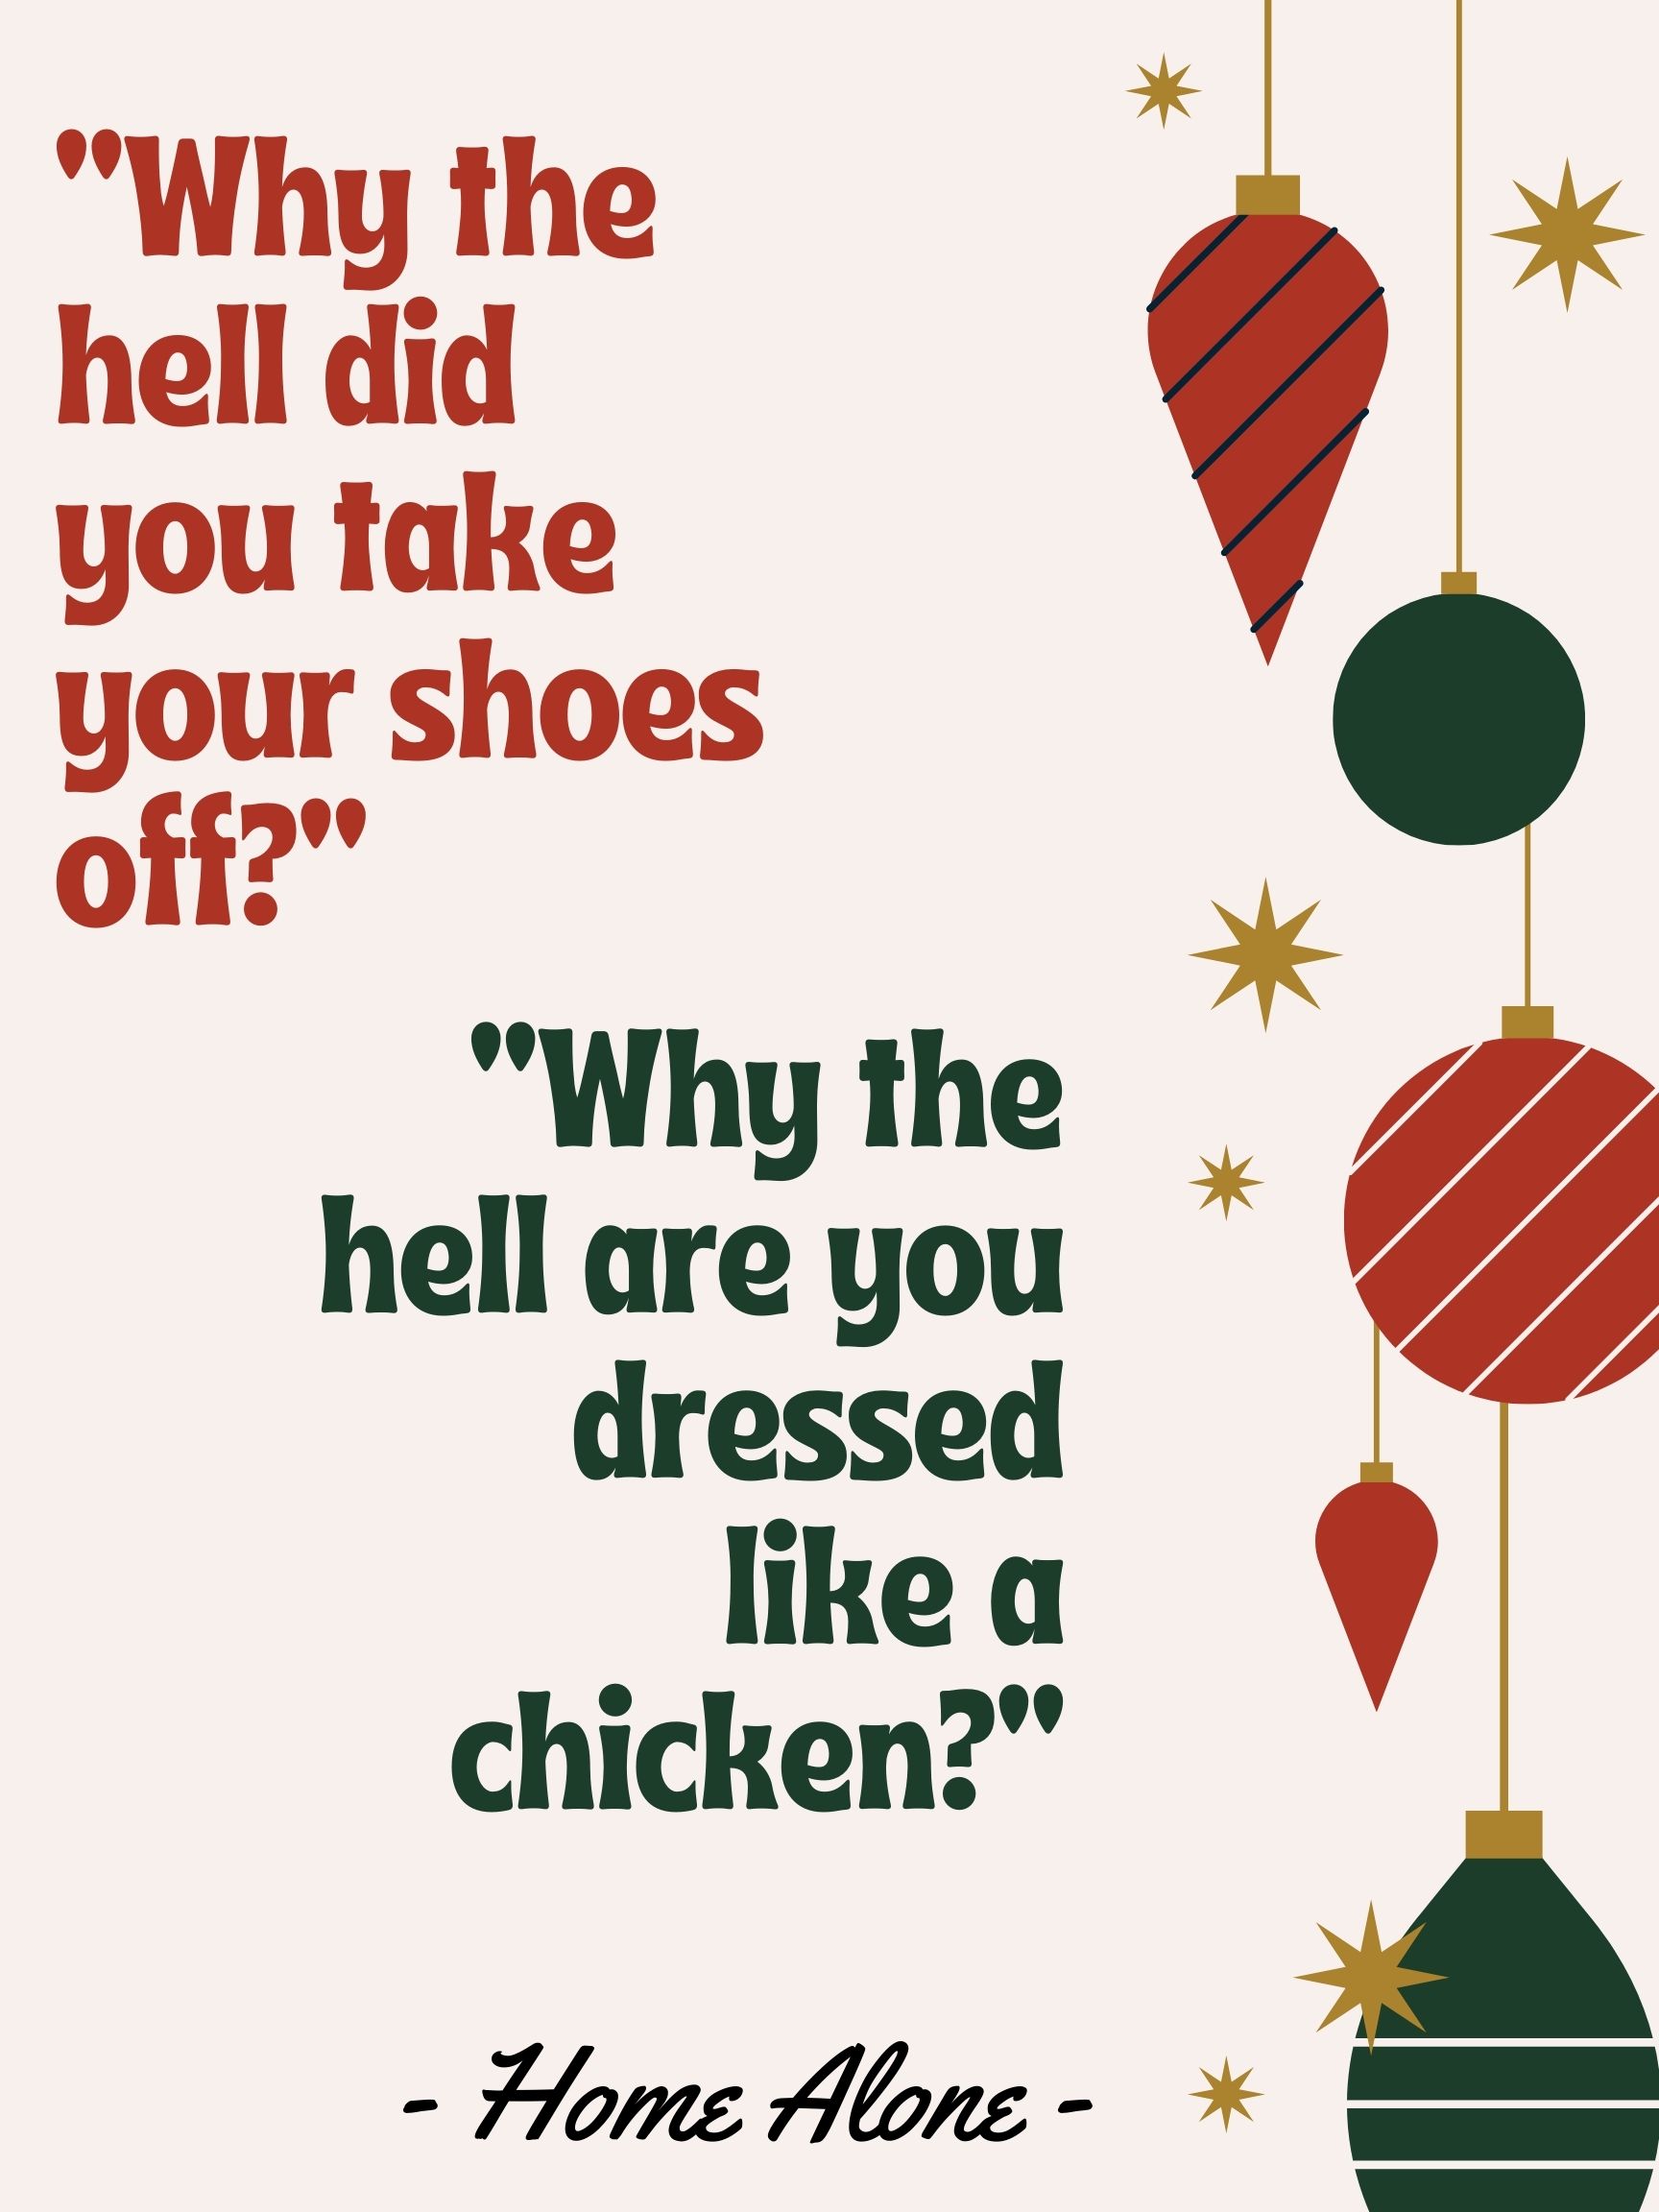 13 Funny Christmas Movie Quotes for the Holiday Season - Let's Eat Cake